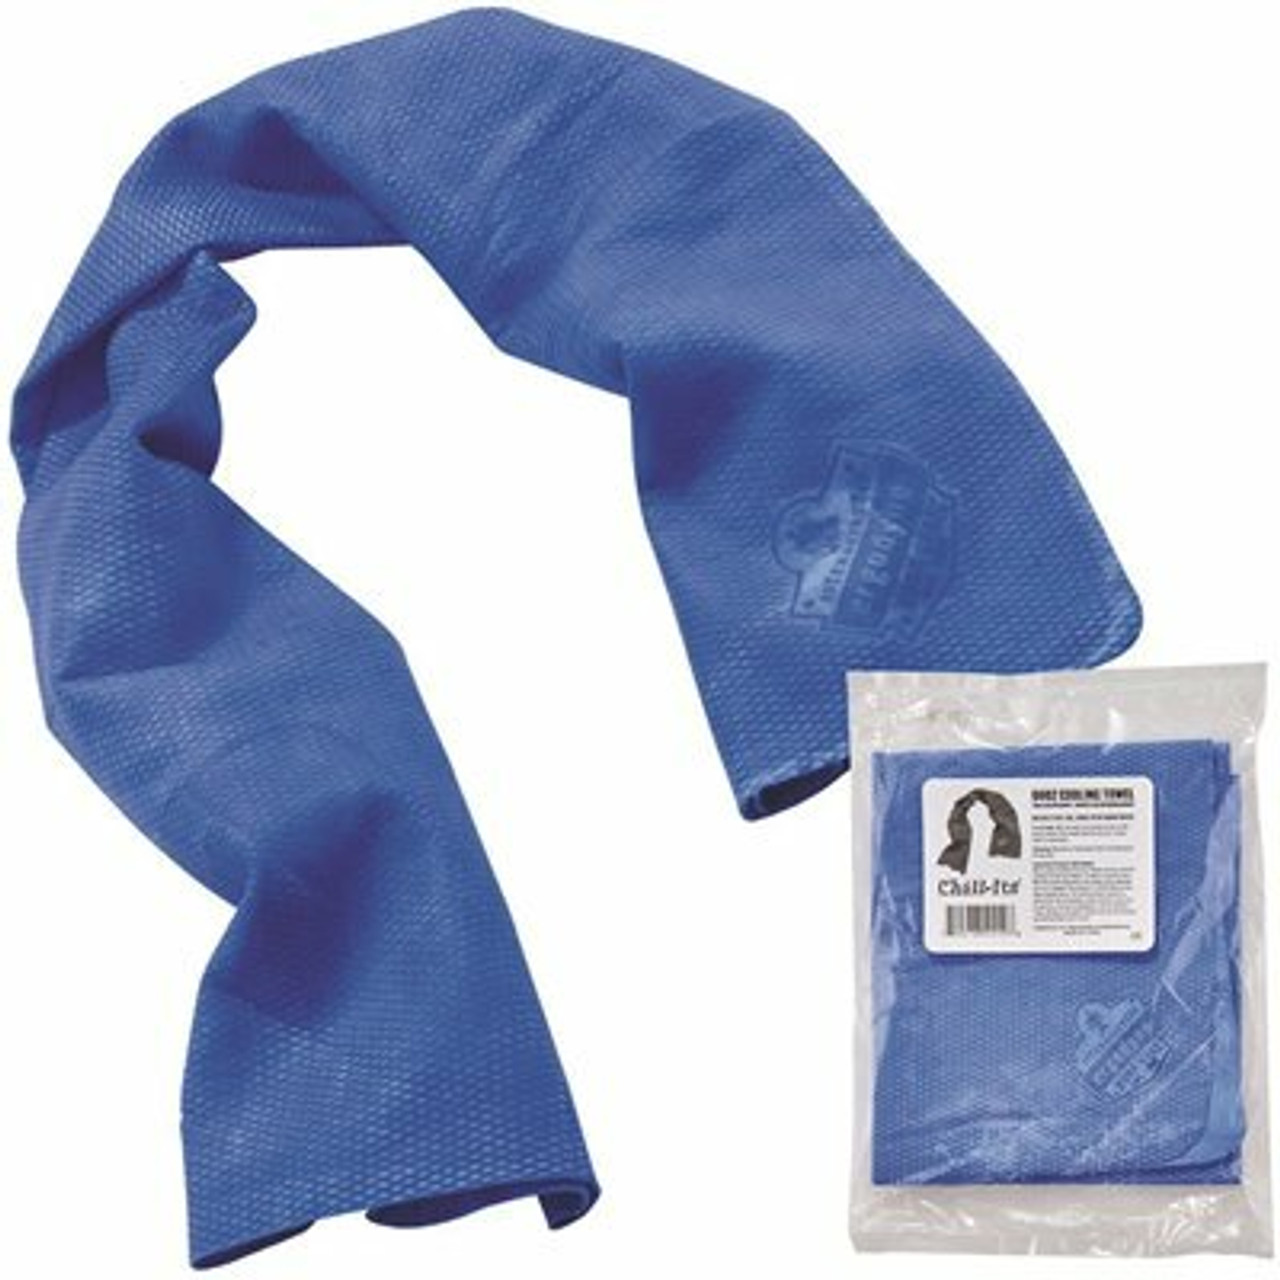 Ergodyne Chill-Its Blue Evaporative Cooling Towel (50-Pack)